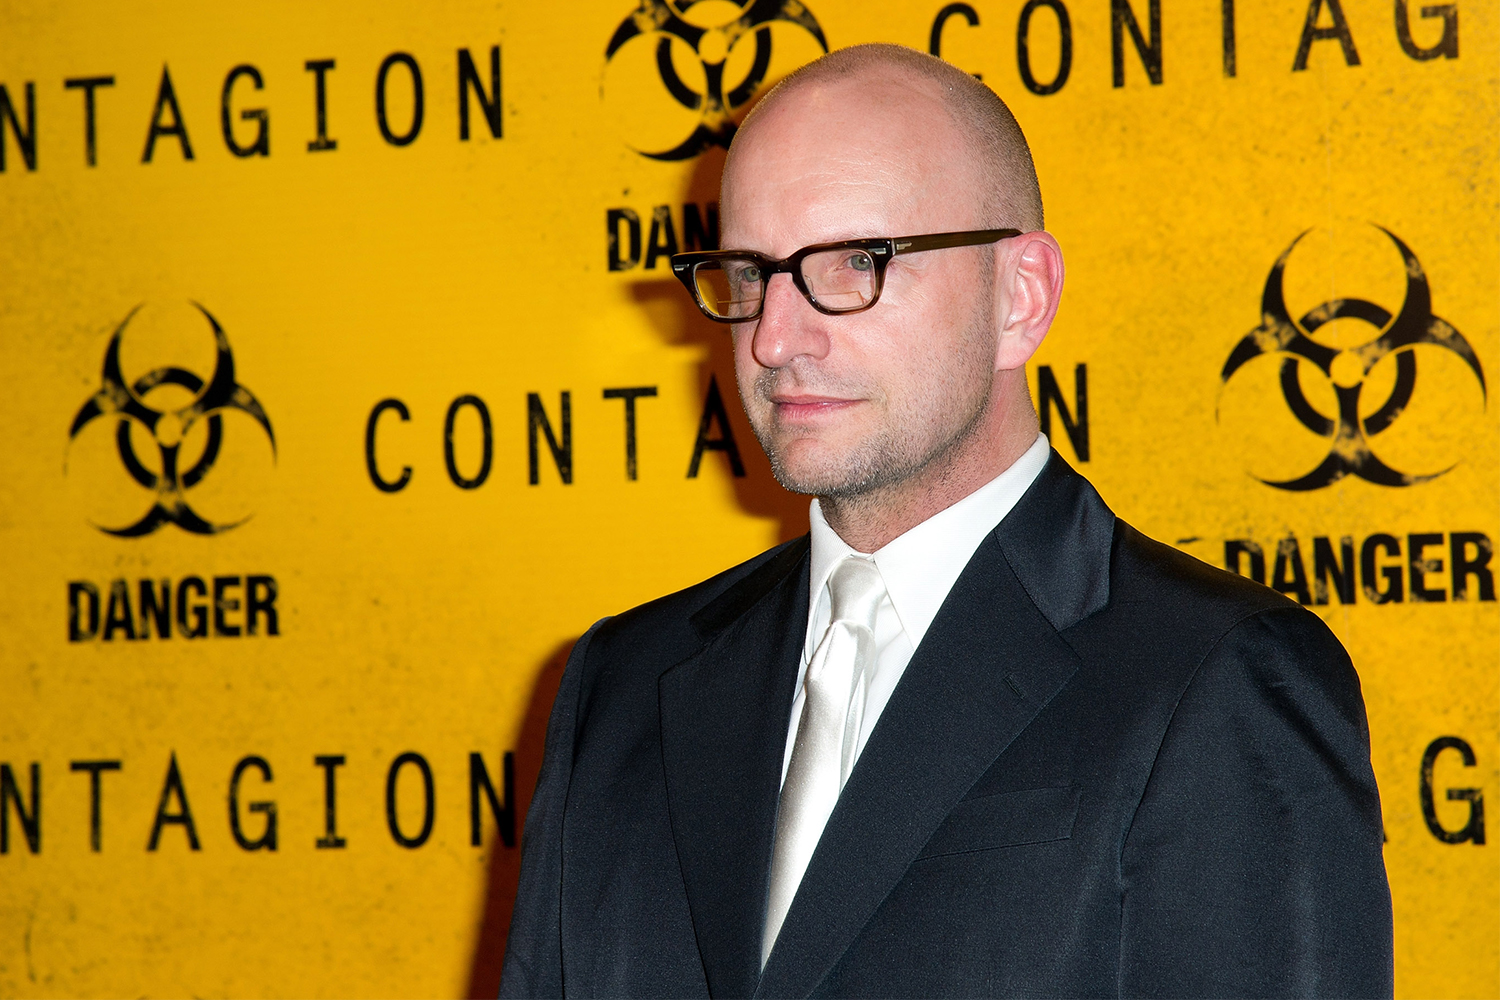 Director Steven Soderbergh at the Premiere of "Contagion" in Paris